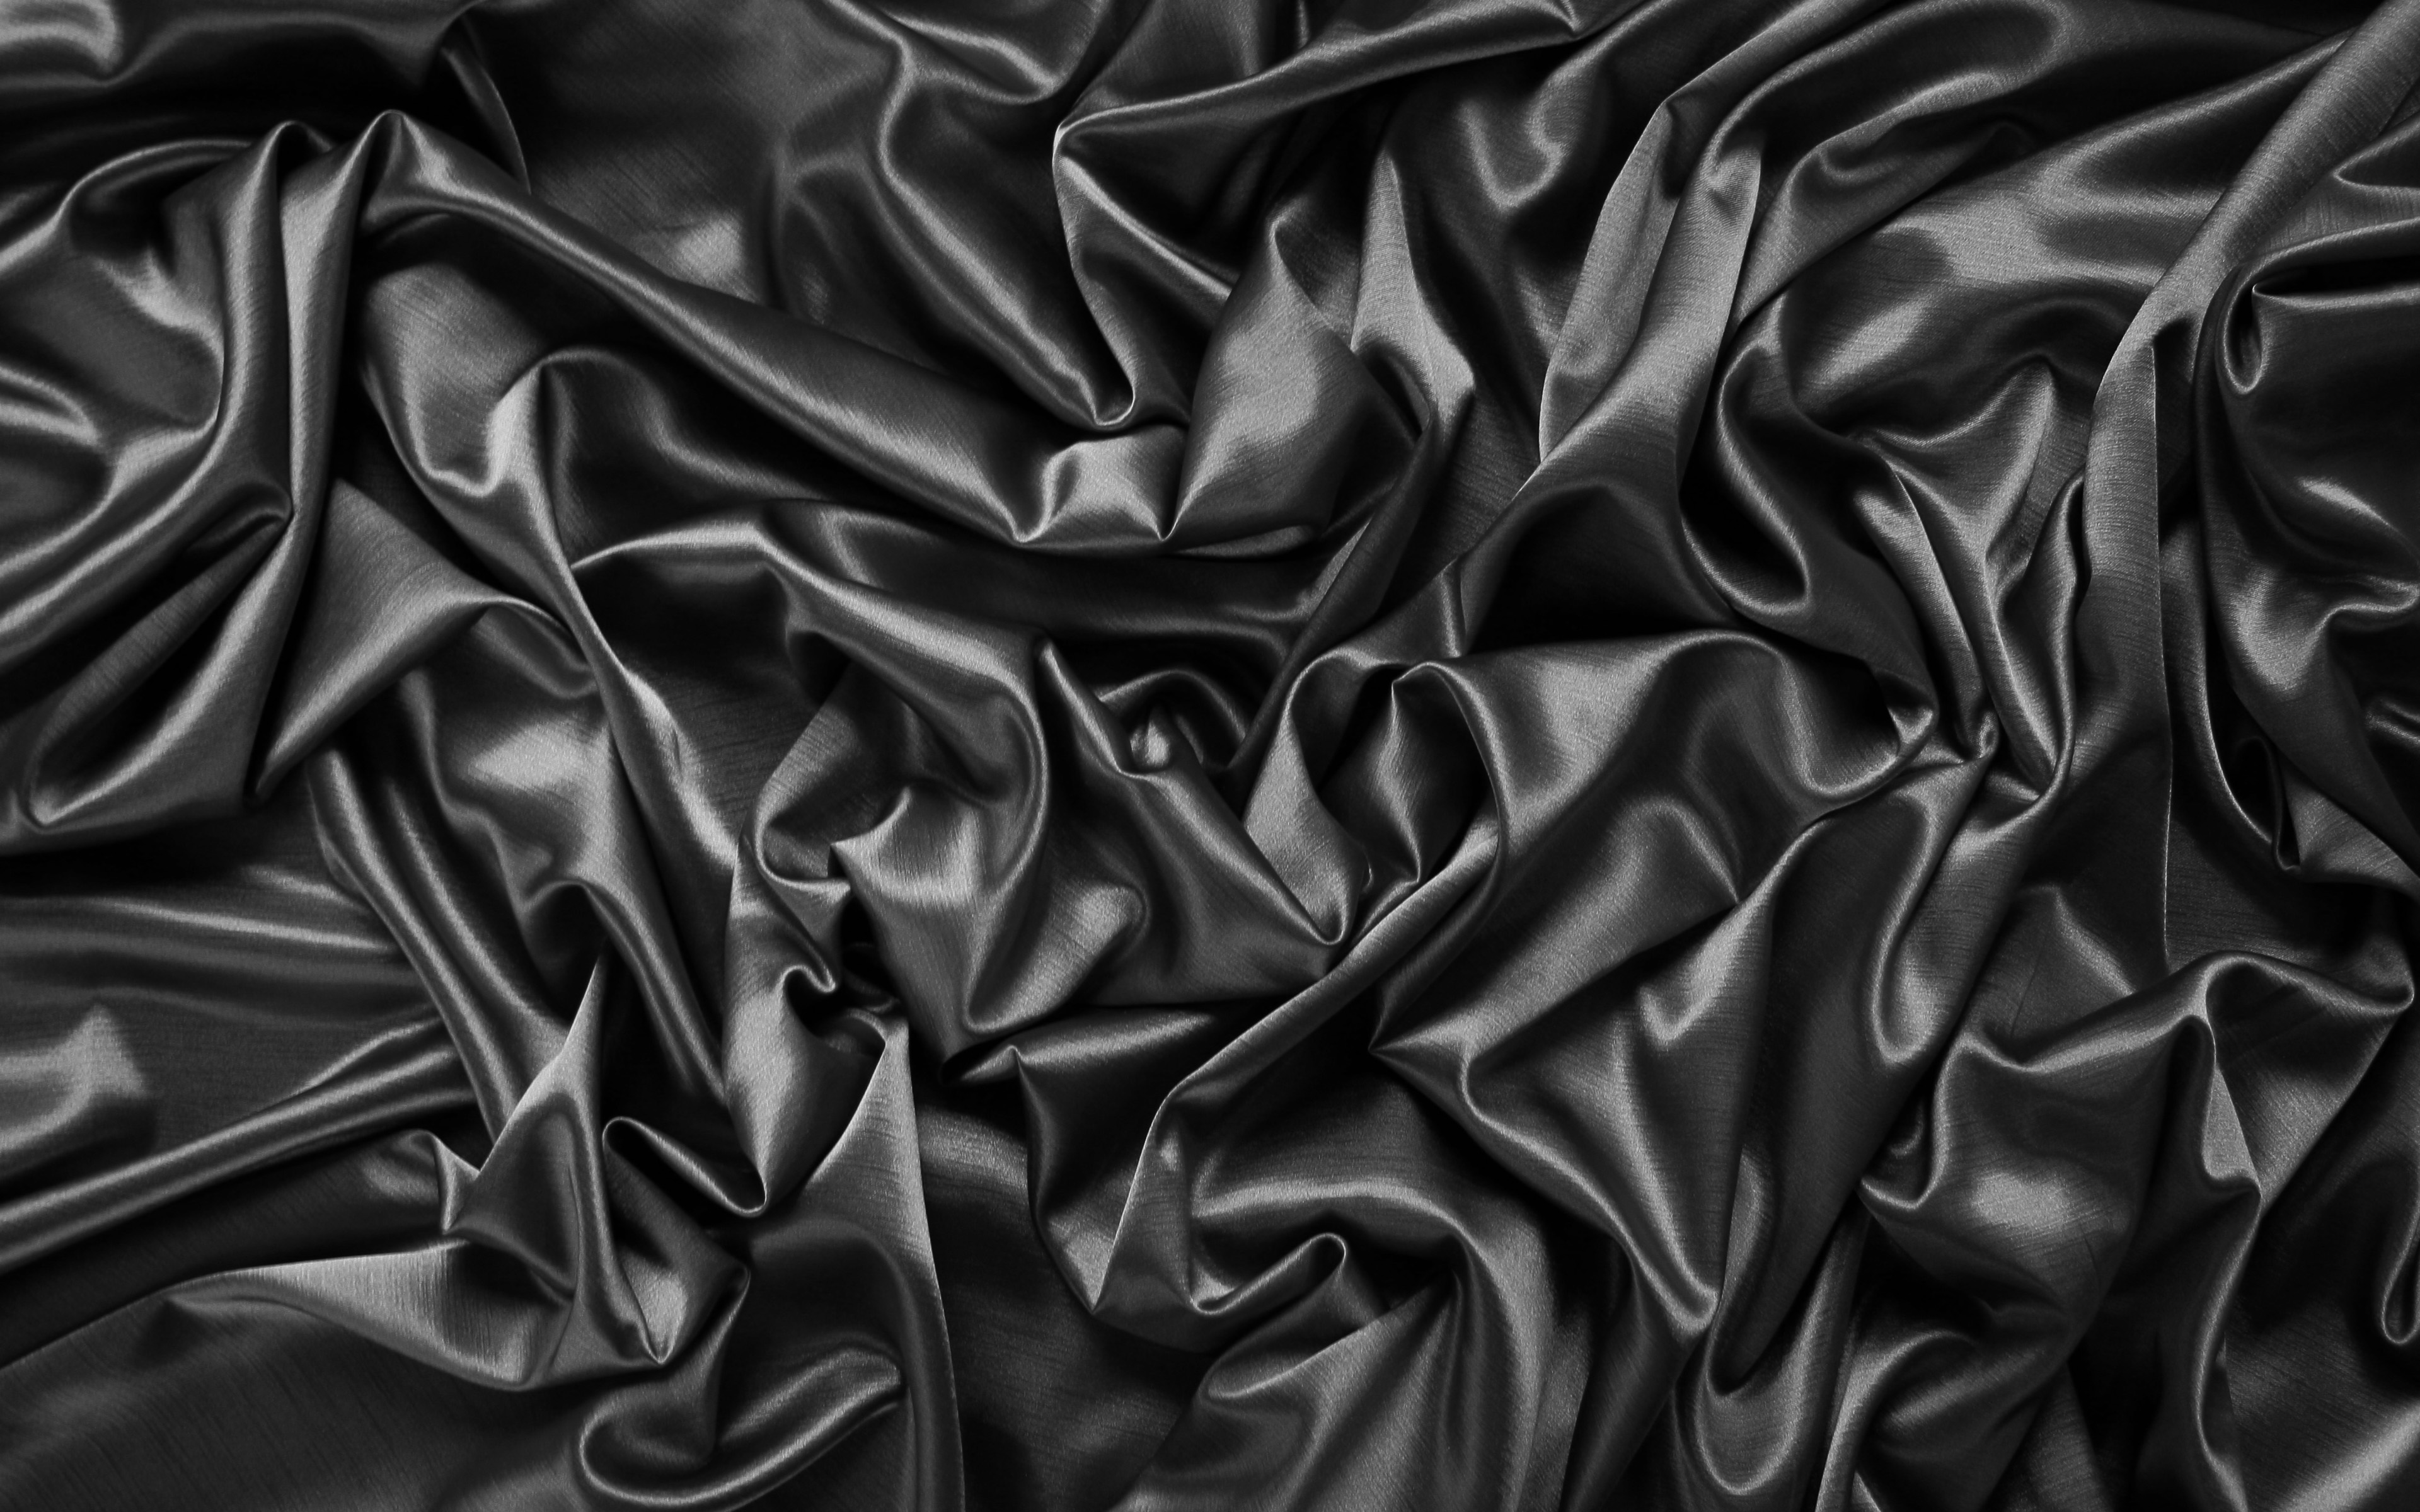 Download wallpaper black satin background, 4k, silk textures, satin wavy background, black background, satin textures, satin background, black silk texture for desktop with resolution 3840x2400. High Quality HD picture wallpaper